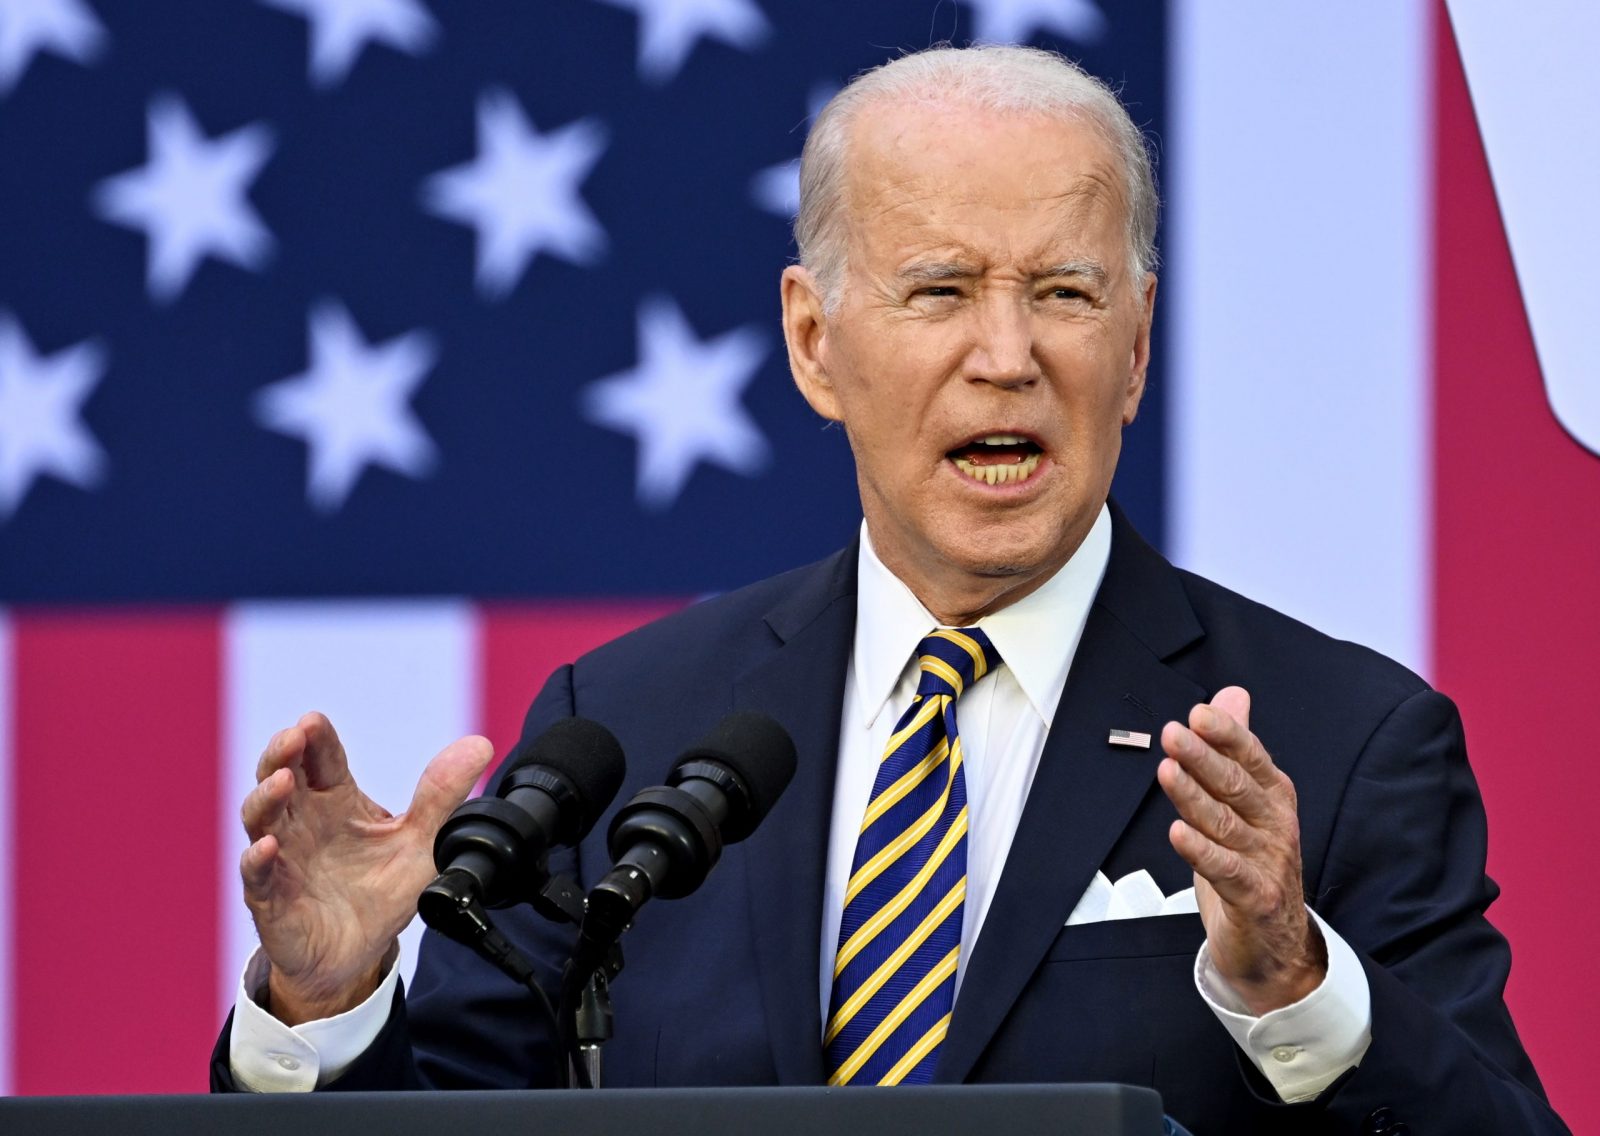 epa10742292 US President Joe Biden delivers a speech at the Vilnius University during the NATO ​summit in Vilnius, Lithuania, 12 July 2023. The North Atlantic Treaty Organization (NATO) Summit takes place in Vilnius on 11 and 12 July 2023 with the alliance's leaders expected to adopt new defense plans.  EPA/FILIP SINGER